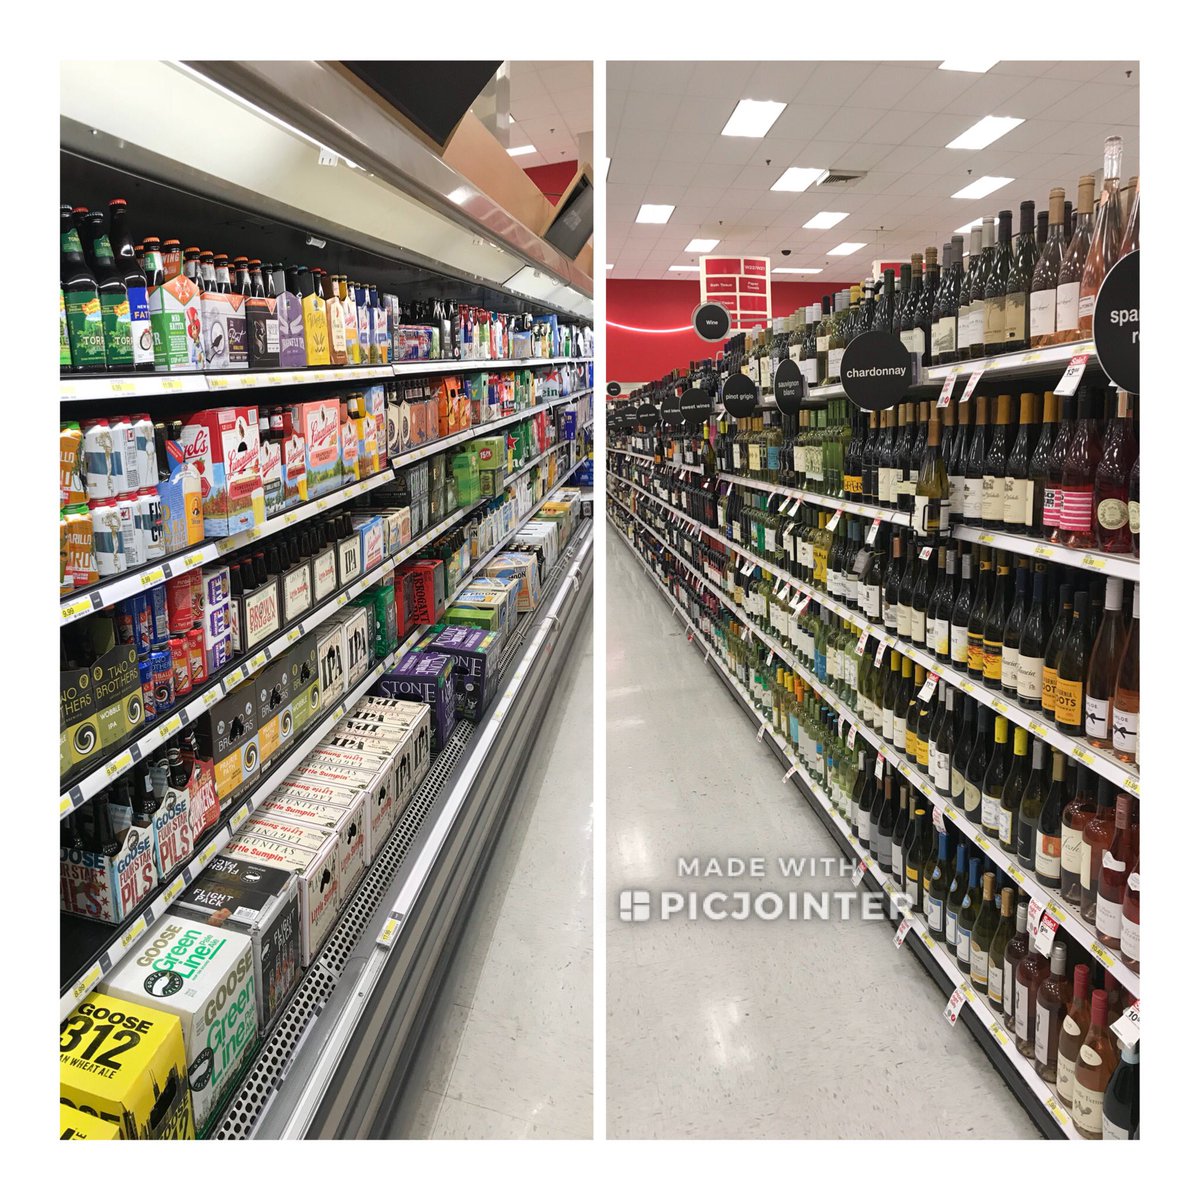 Stocked and ready to cheers to the new year at T0835! #nyeready @Jeff_DeMoss